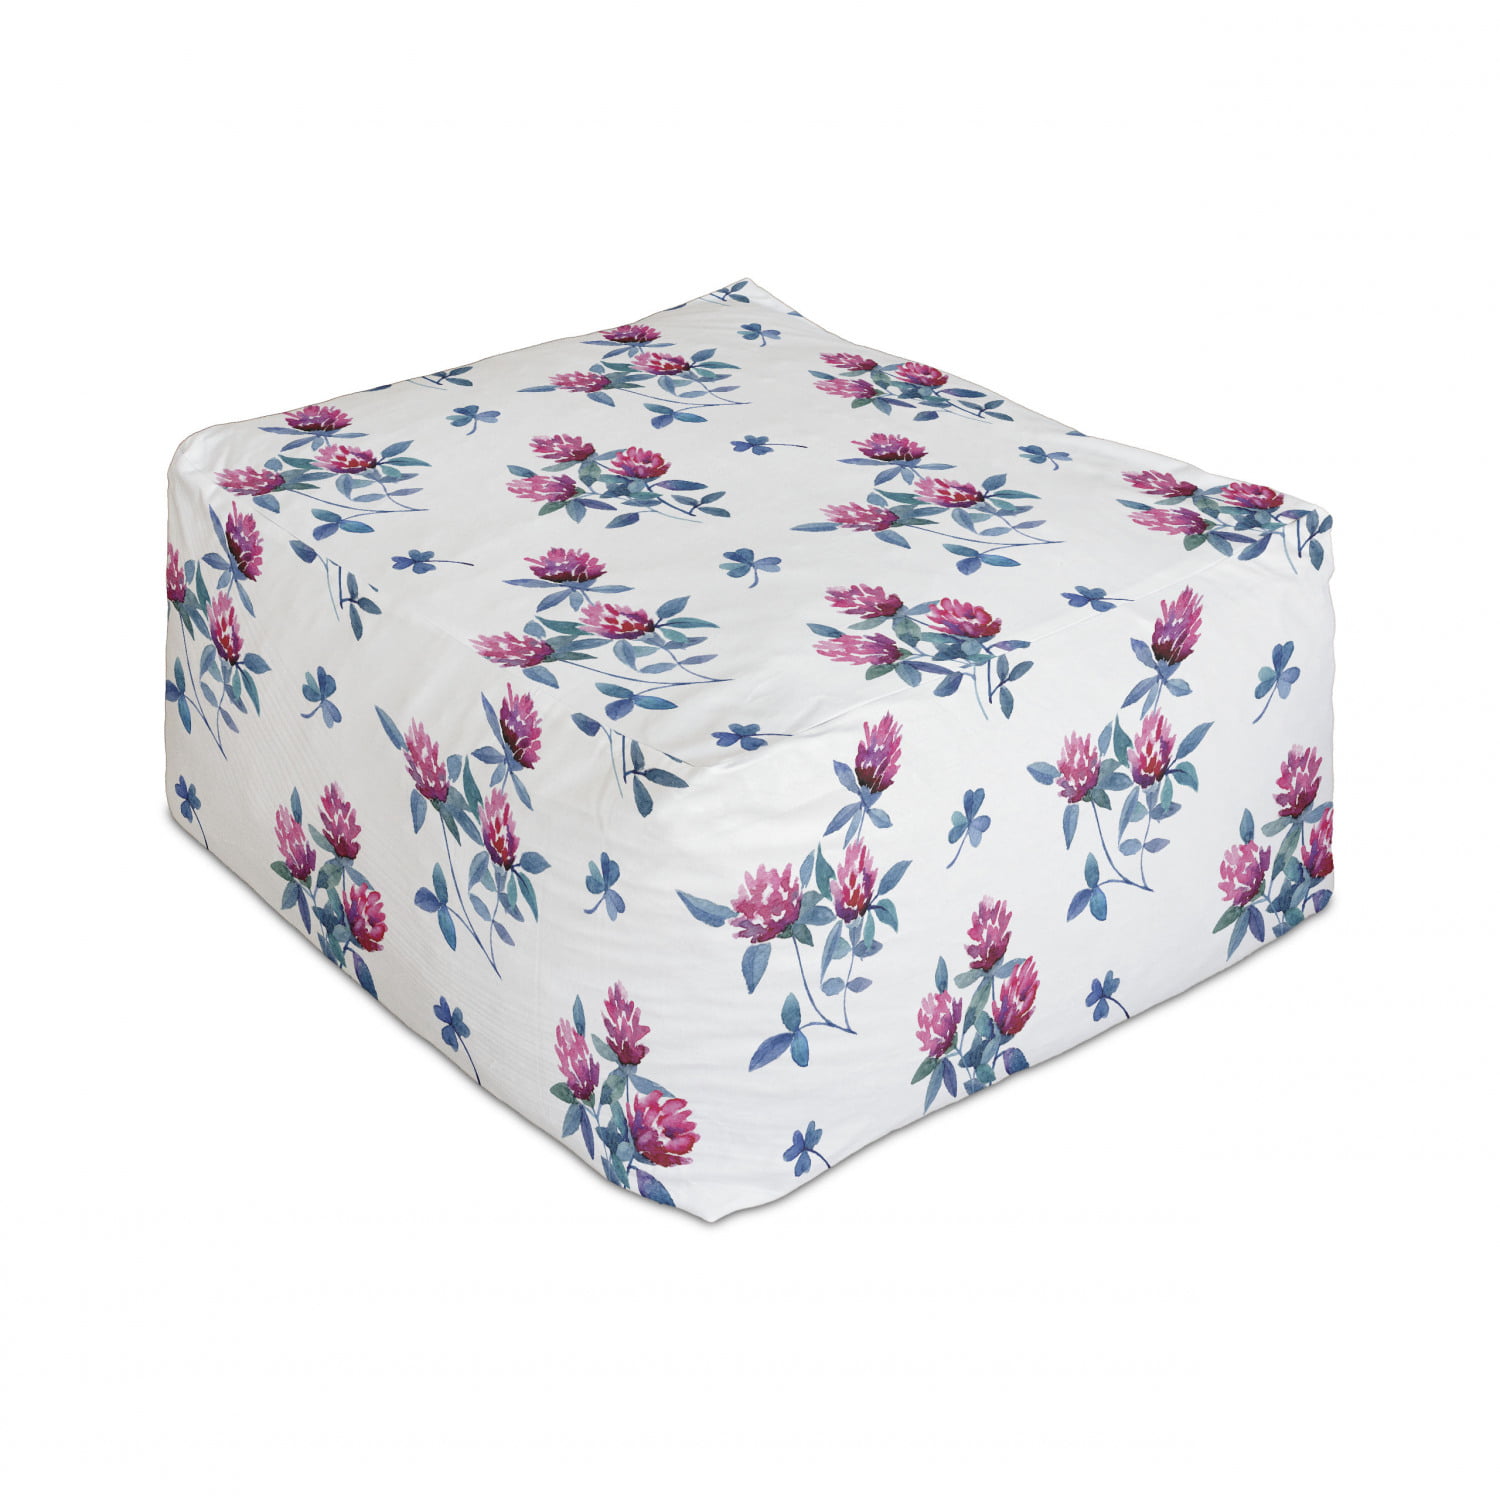 Romantic Season Flowers on Branches Spring Round Motifs on Plain Background Under Desk Foot Stool for Living Room Office Ottoman with Cover Ambesonne Floral Rectangle Pouf Multicolor 25 